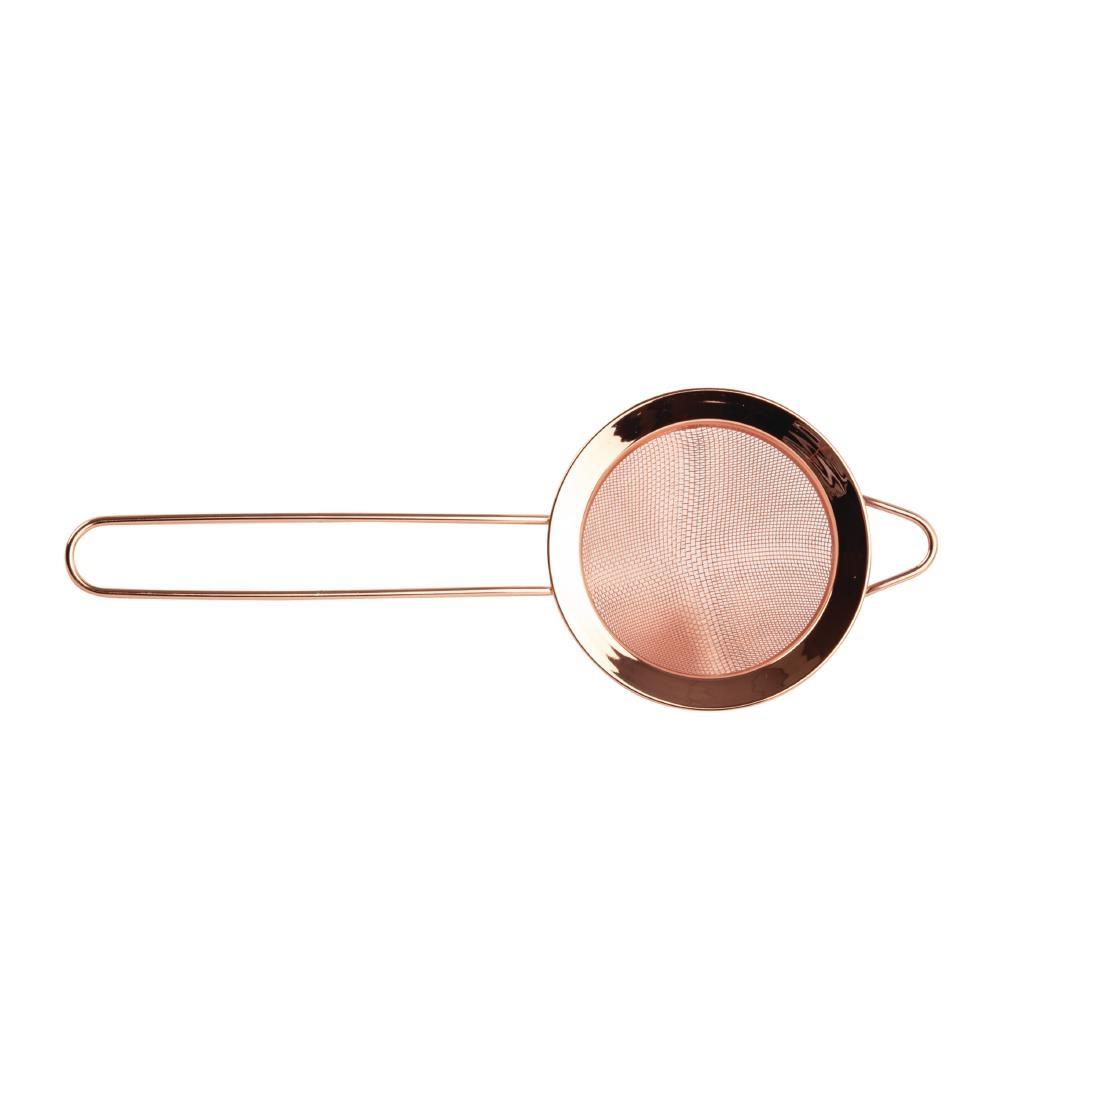 Olympia Mesh Strainer Copper - DR601  - 4